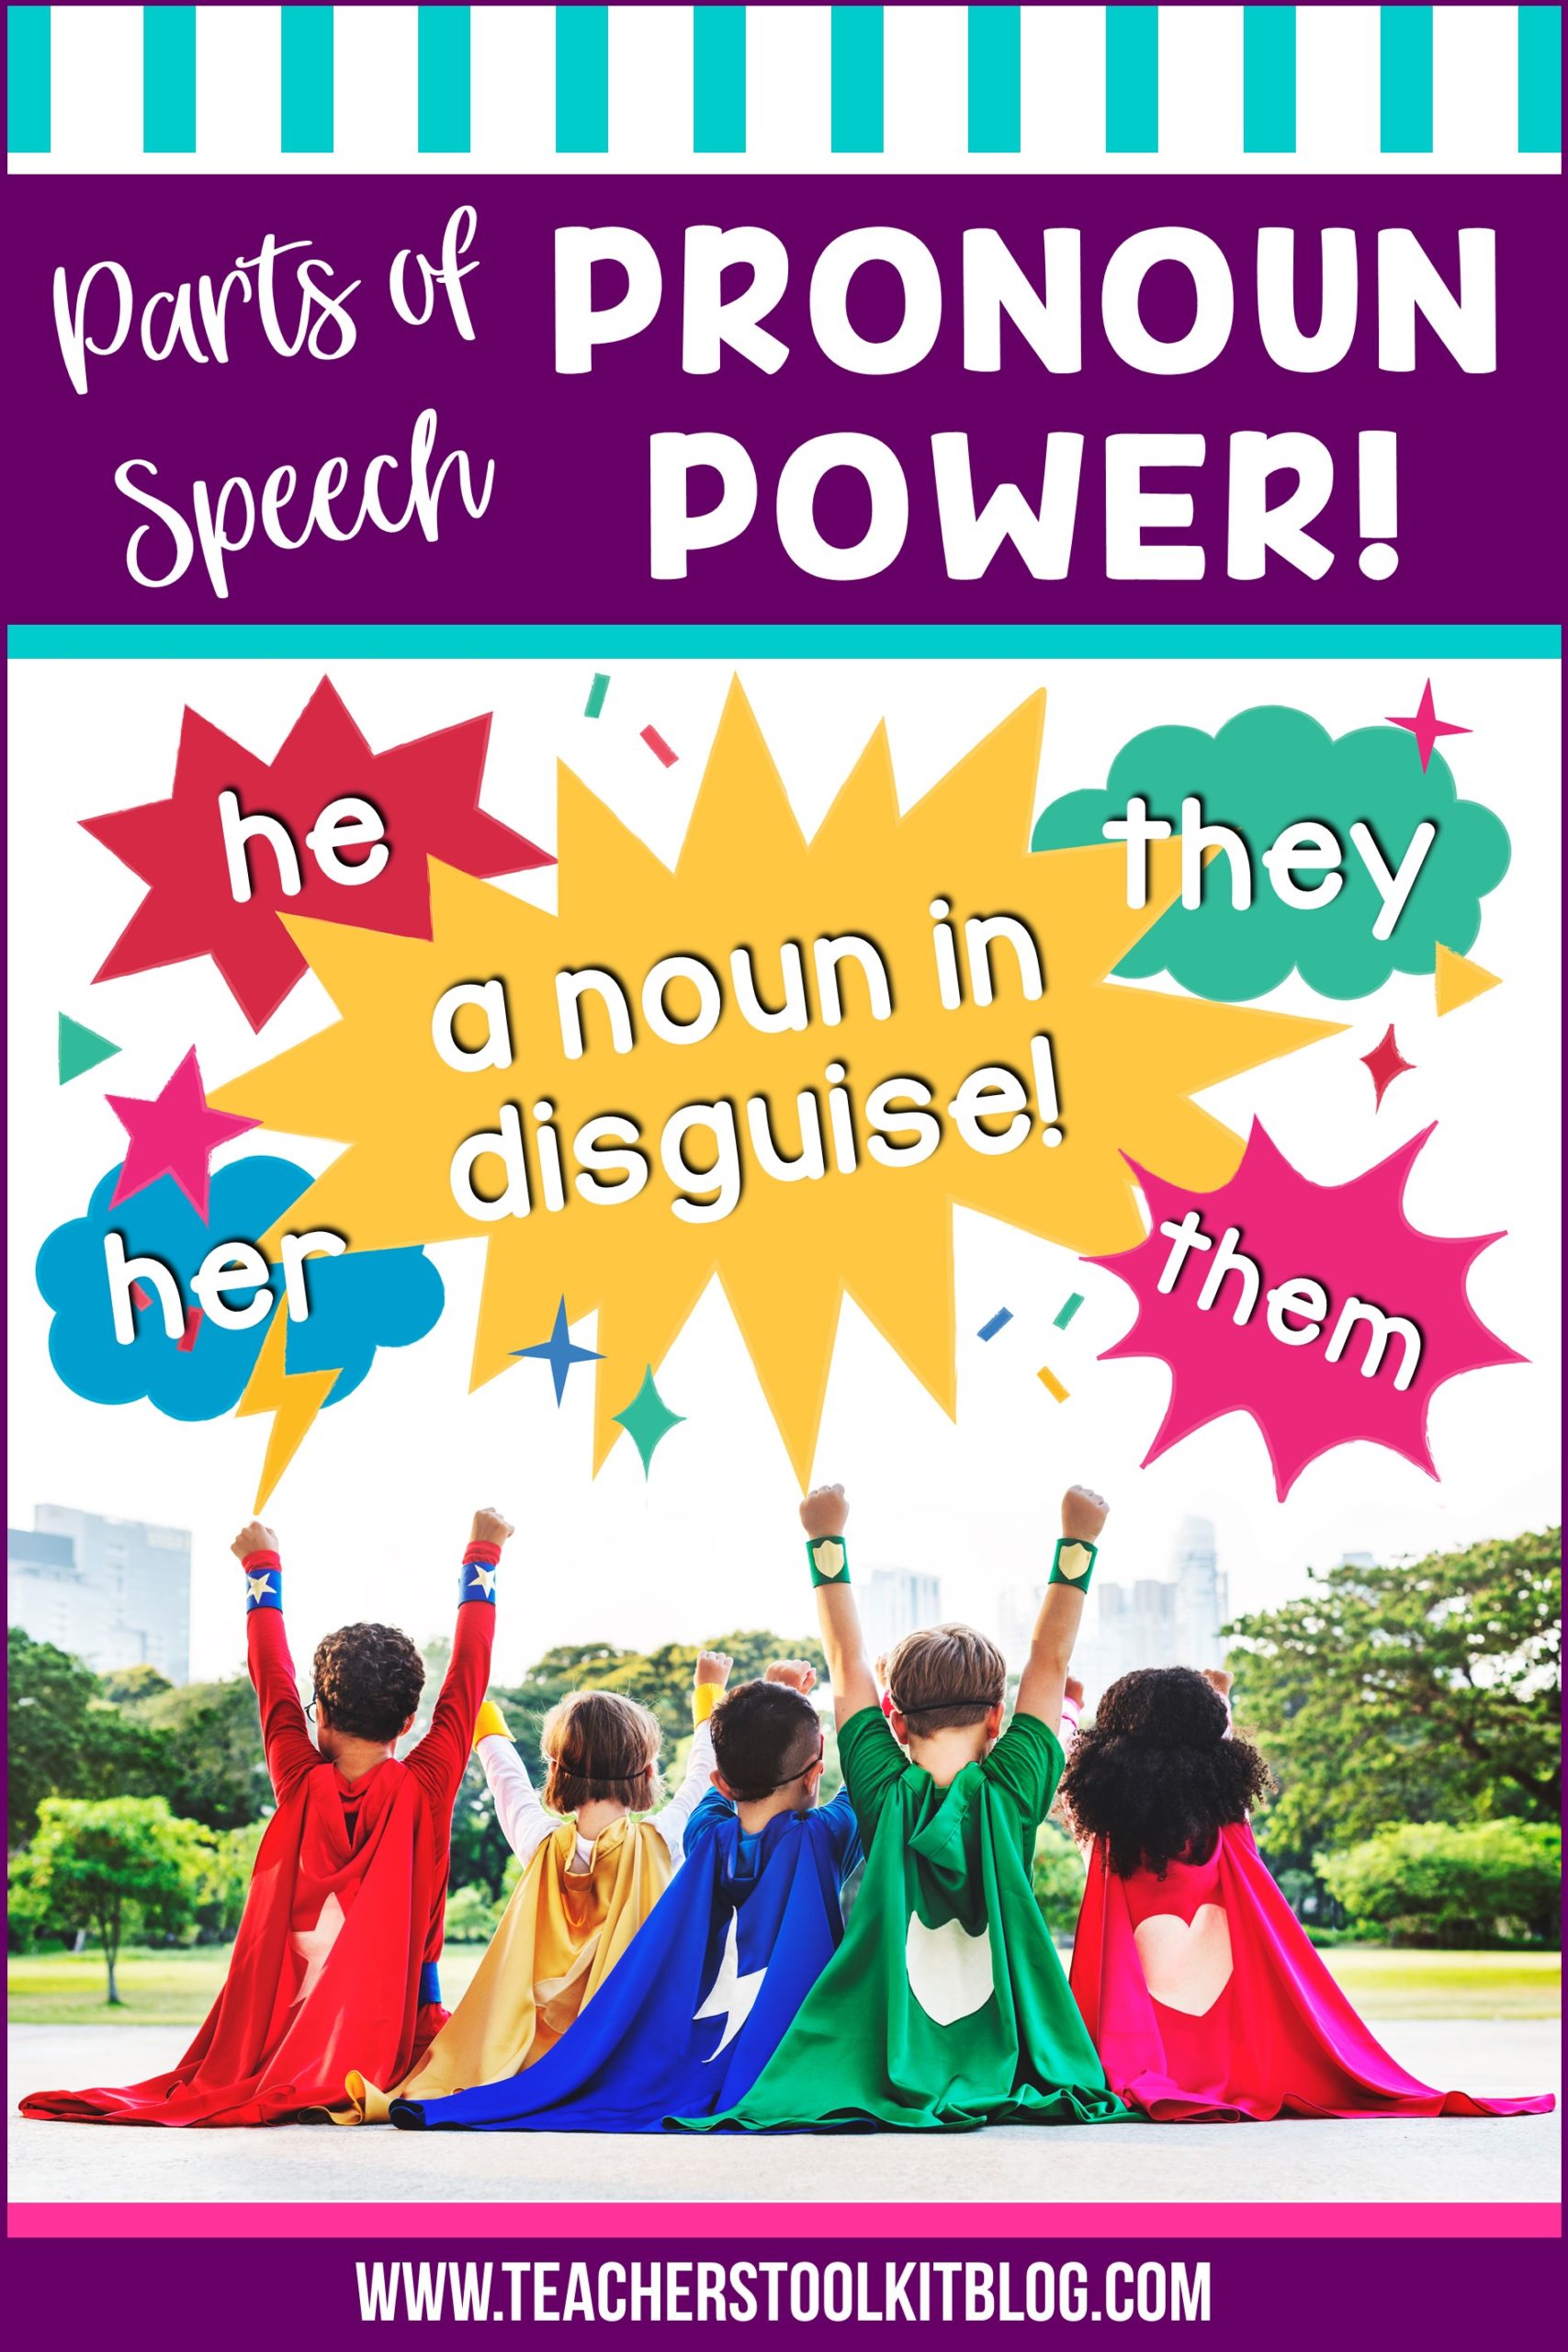 Teaching Parts of Speech Pronouns with fun games and activities